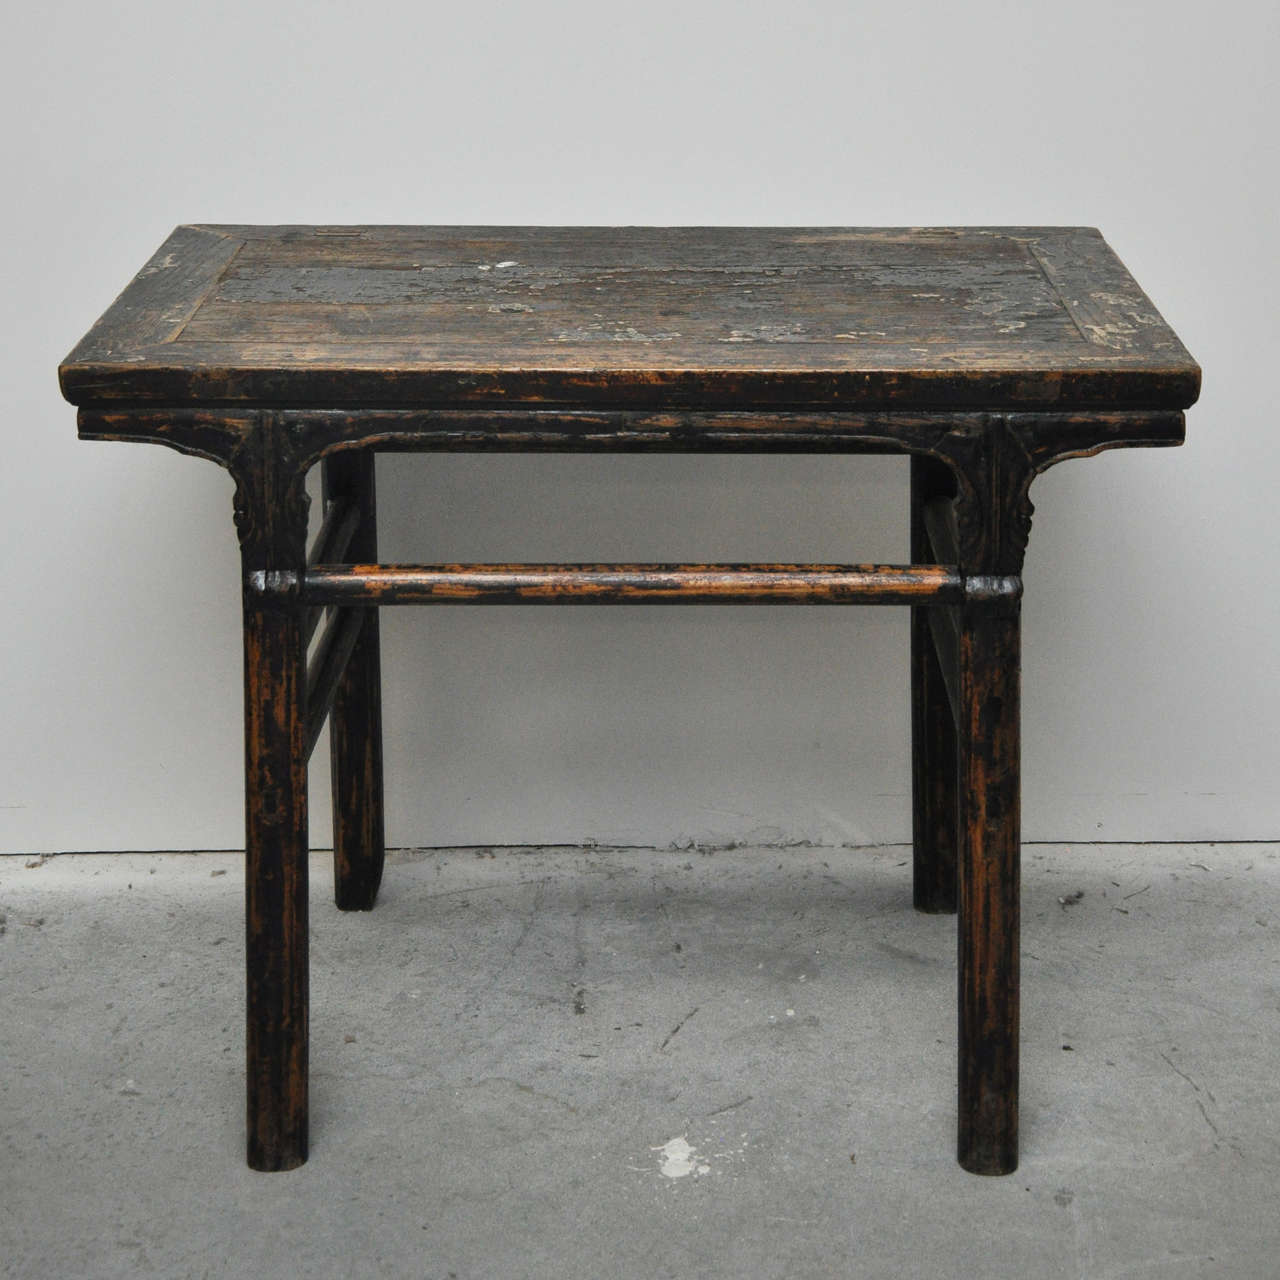 Beautifully aged table from Northern China.